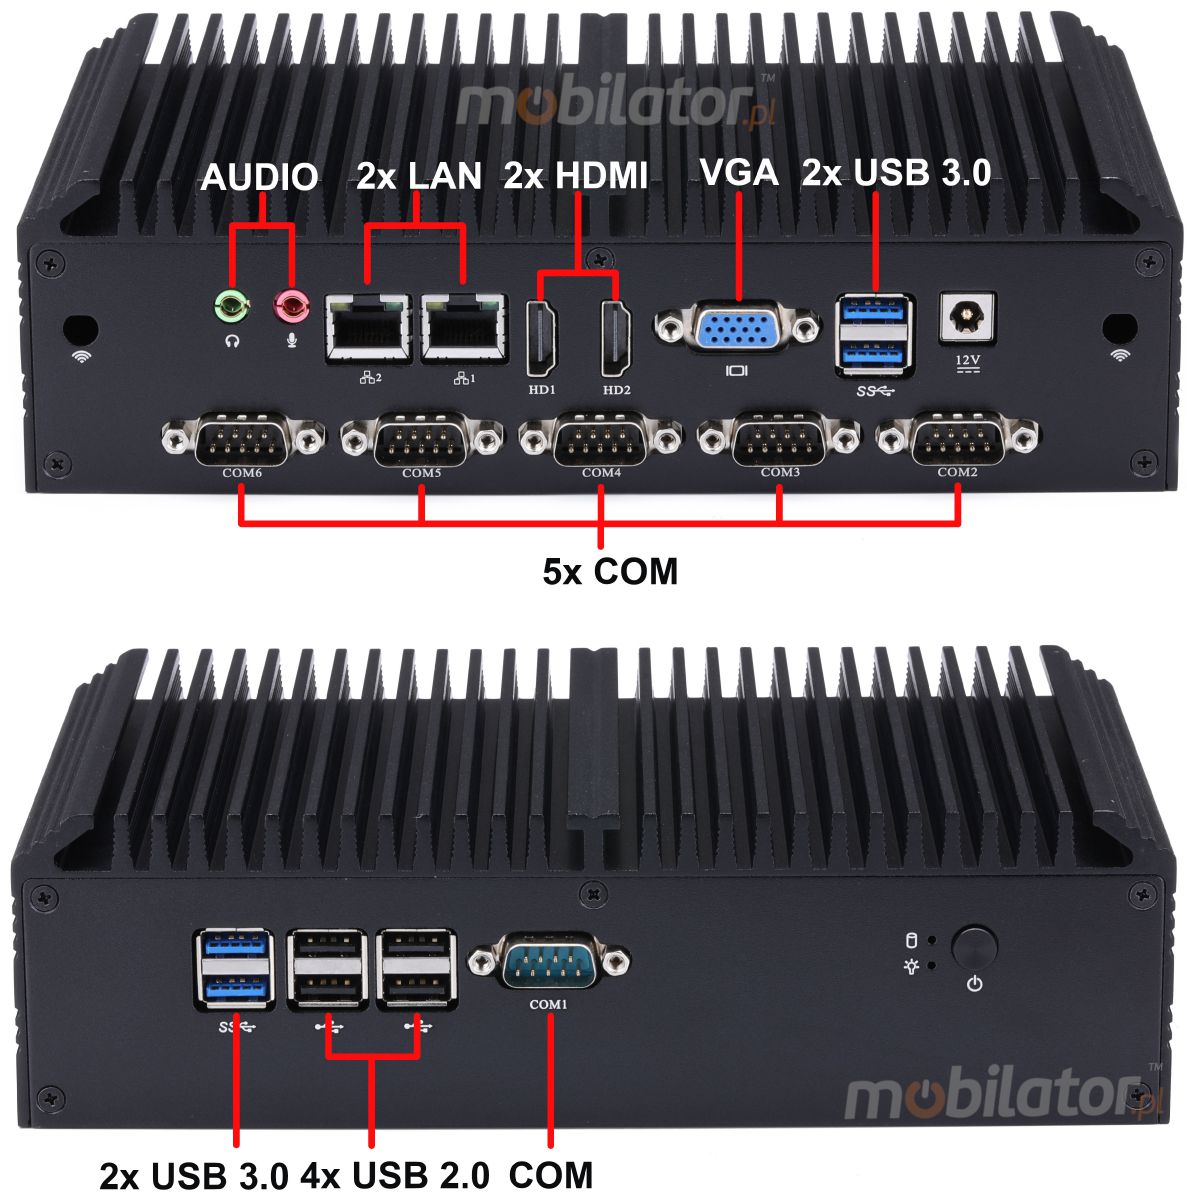 mBox X105 v.4 - Industrial Mini Computer with: passive cooling, M.2 disk (512GB), slot for another 2.5'' disk, 16GB RAM, USB 3.0, WIFI + BT - Interfaces